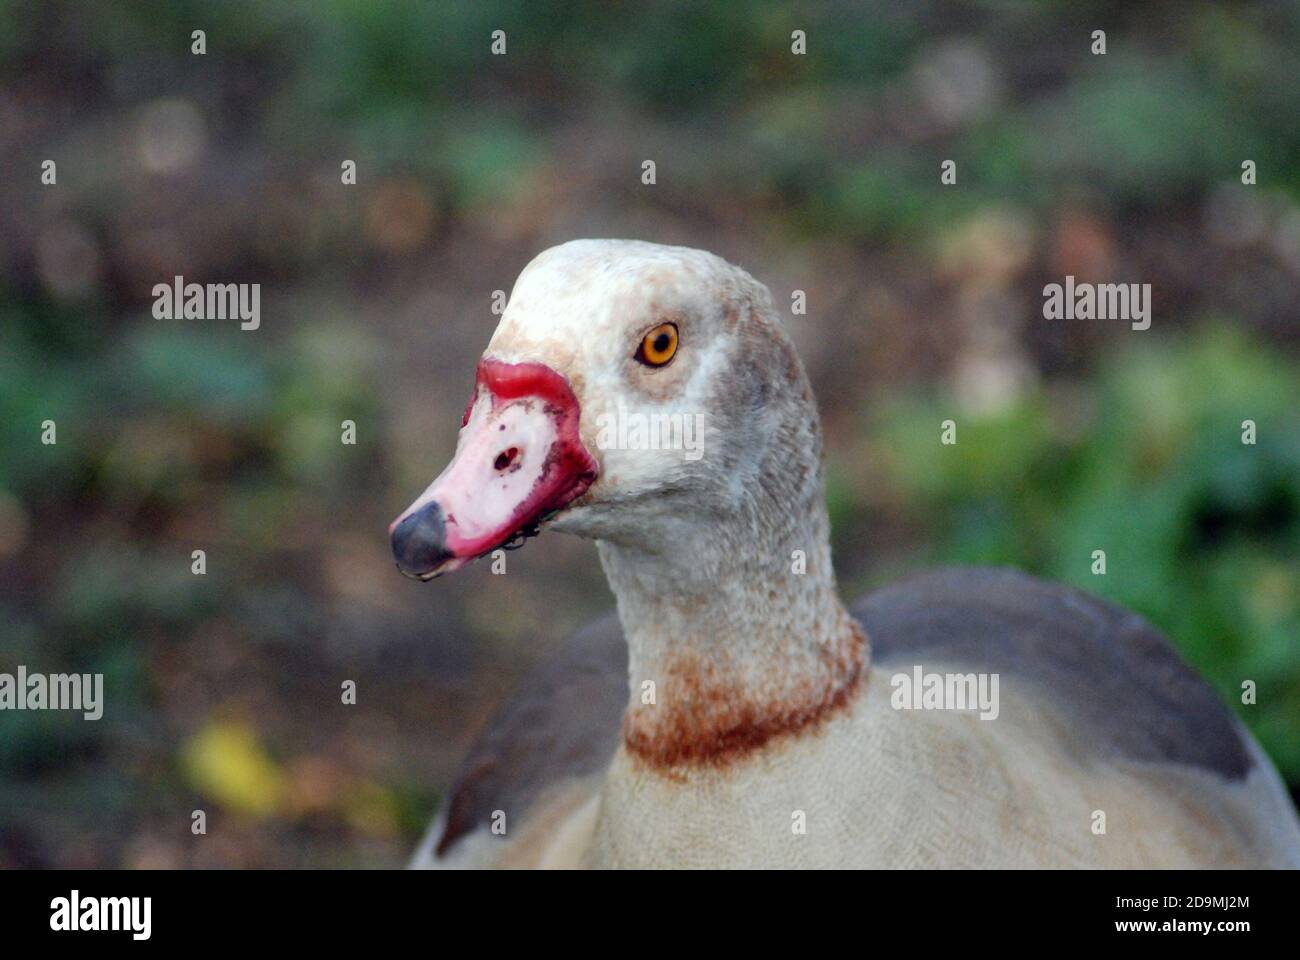 Juvenile Egyptian goose (Alopochen aegyptiaca), member of the duck, goose, and swan family. Close-up head and neck. Appeared in Ancient Egyptian art. Stock Photo